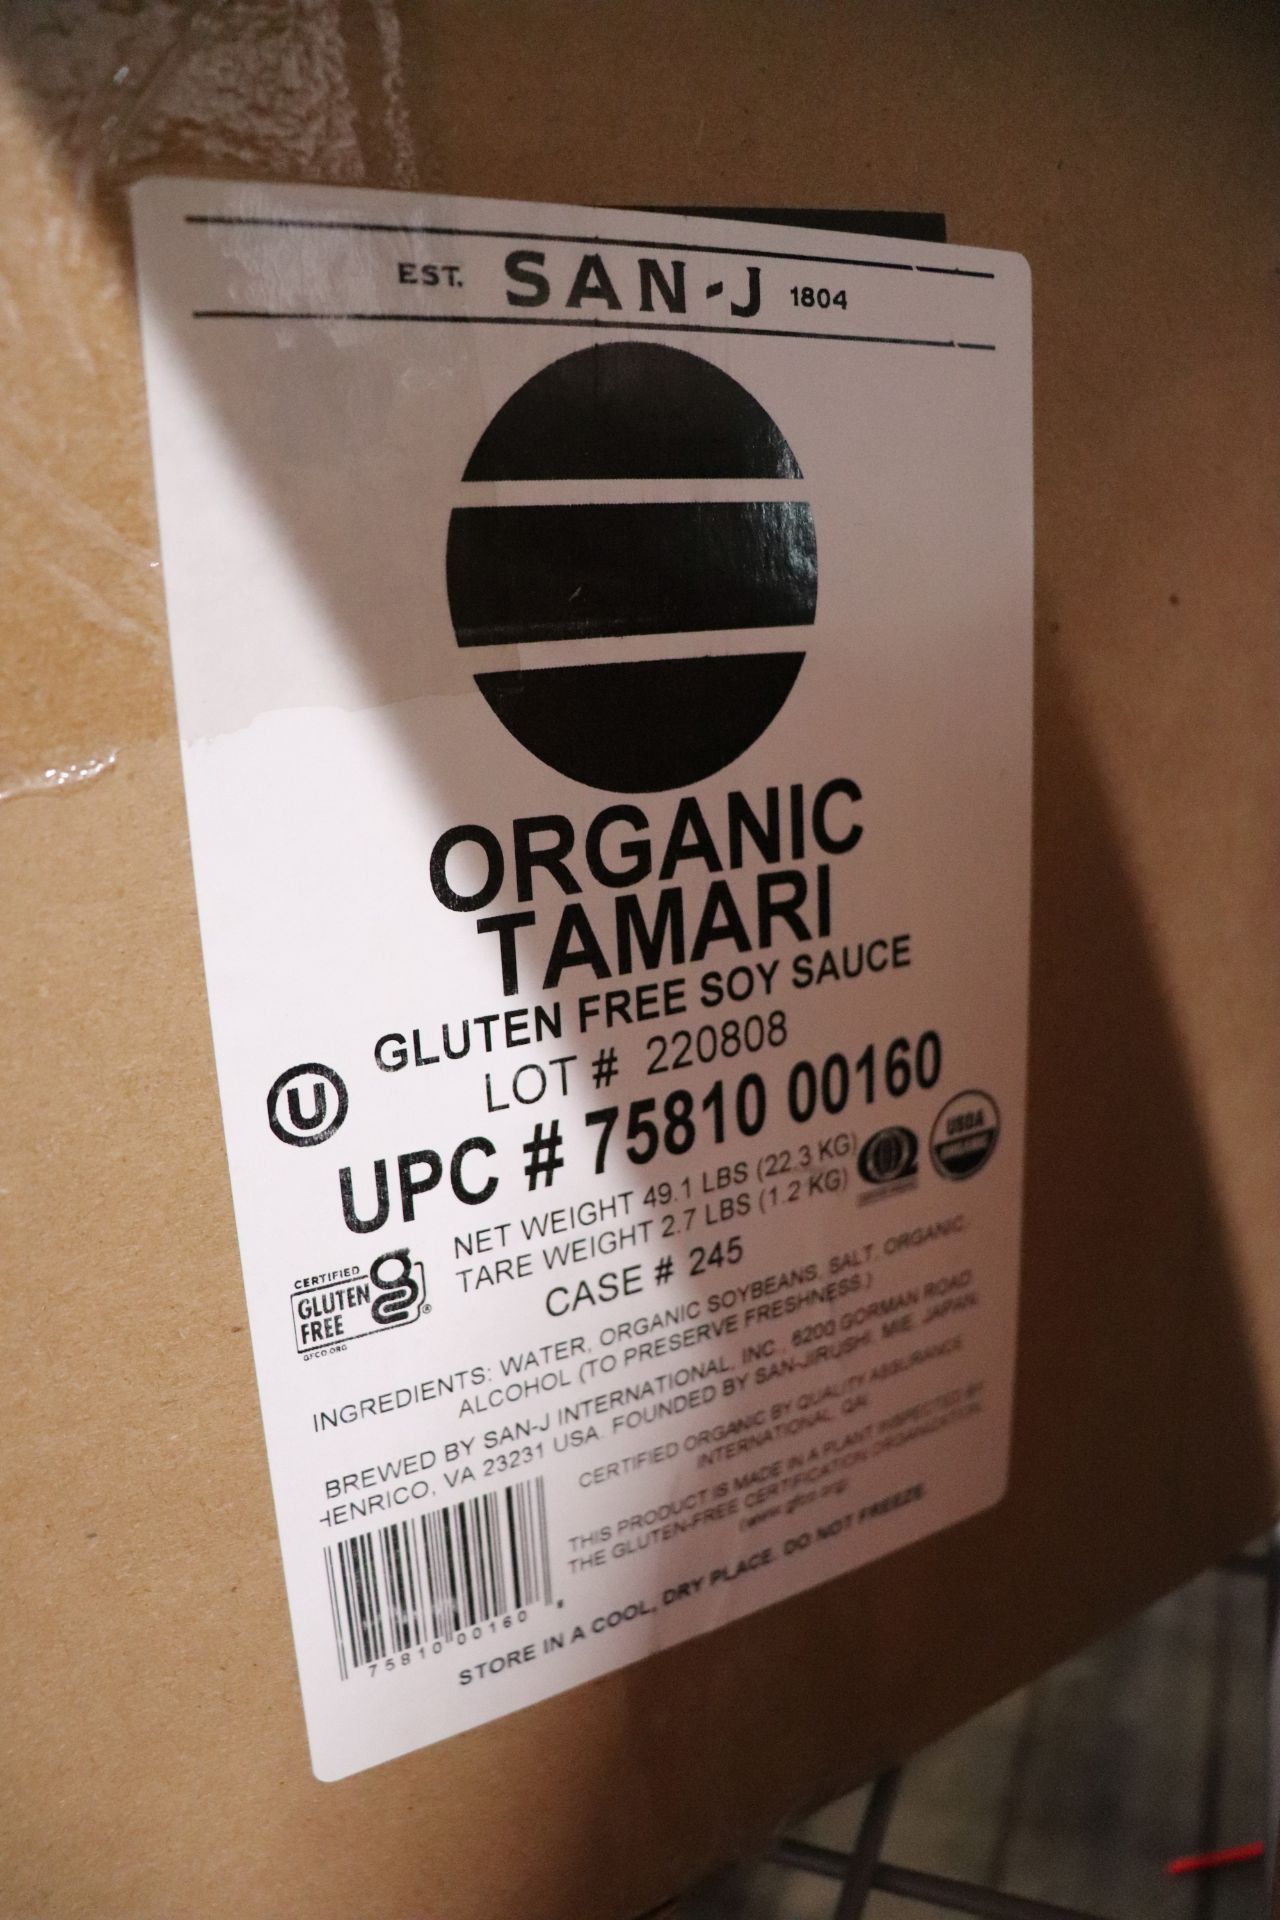 Five gallons of gluten free soy sauce by Organic Tamari - Image 2 of 2